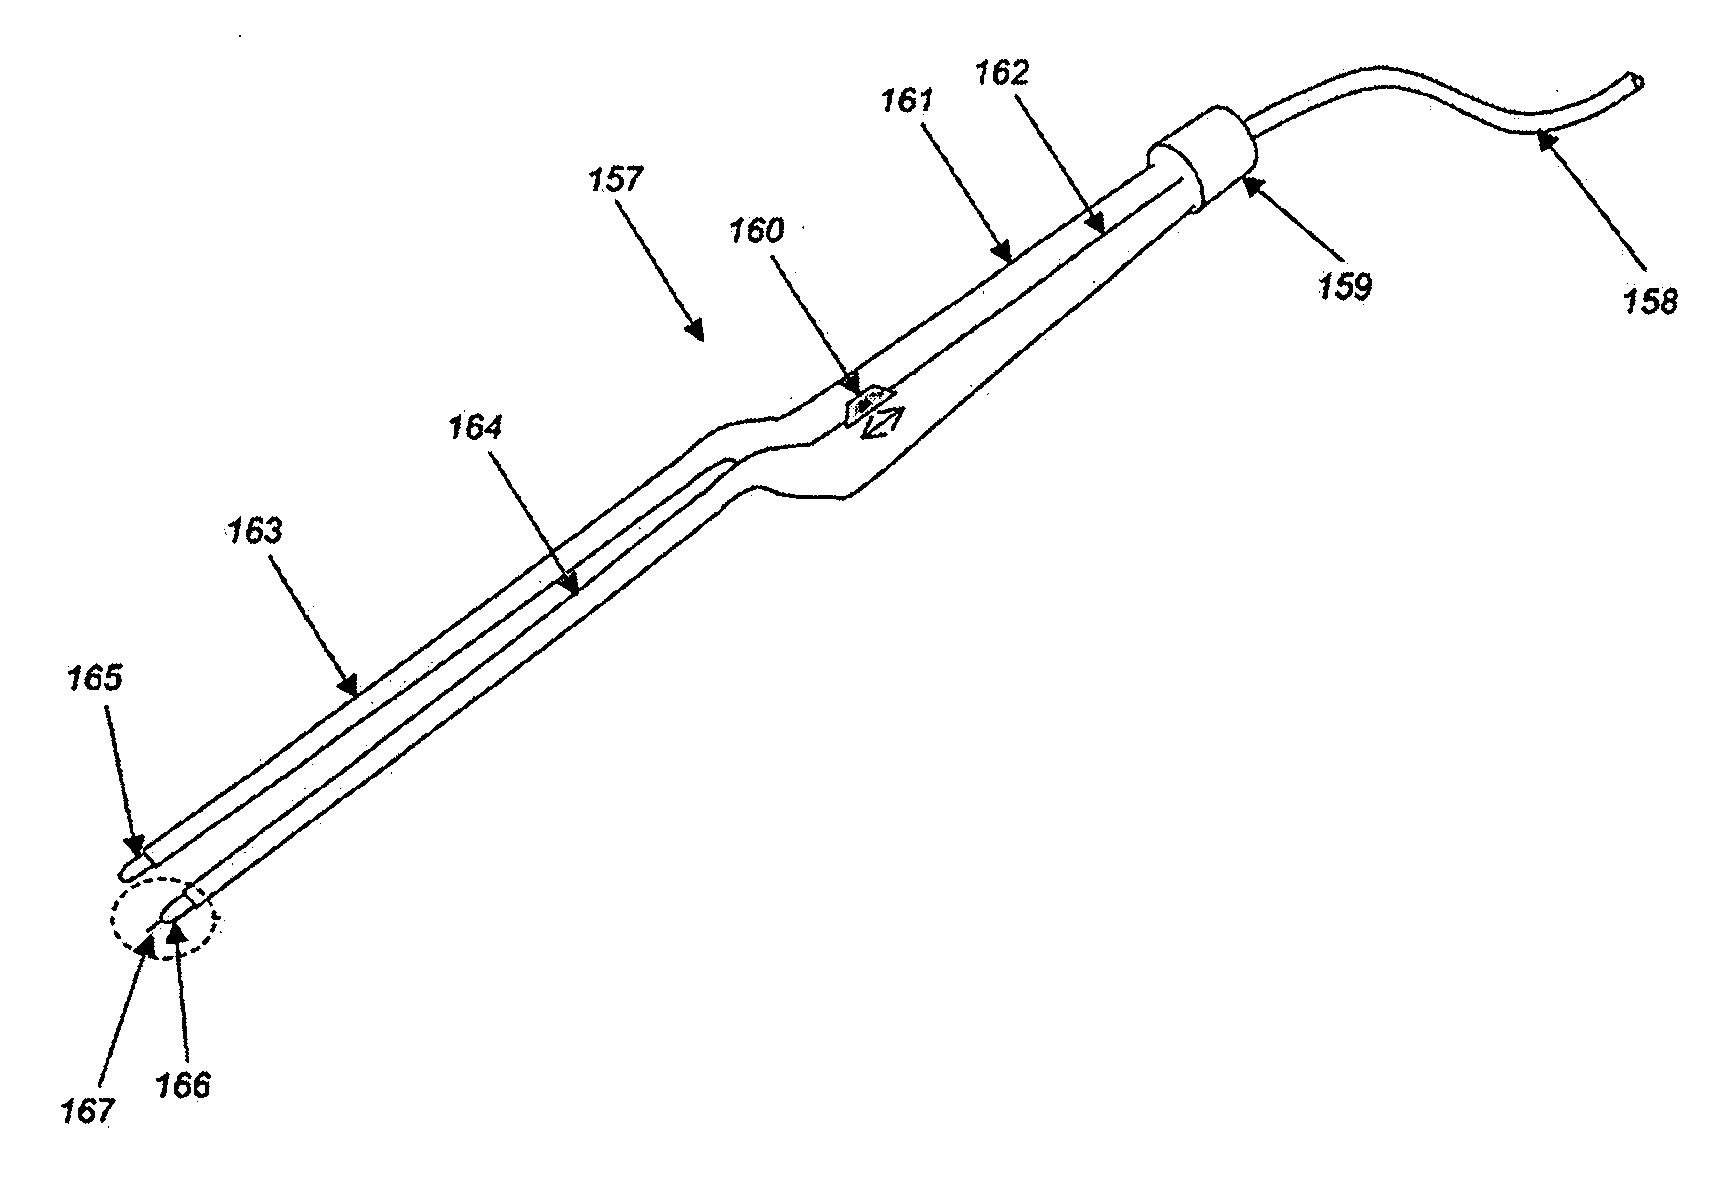 Electrosurgical tool with moveable electrode that can be operated in a cutting mode or a coagulation mode